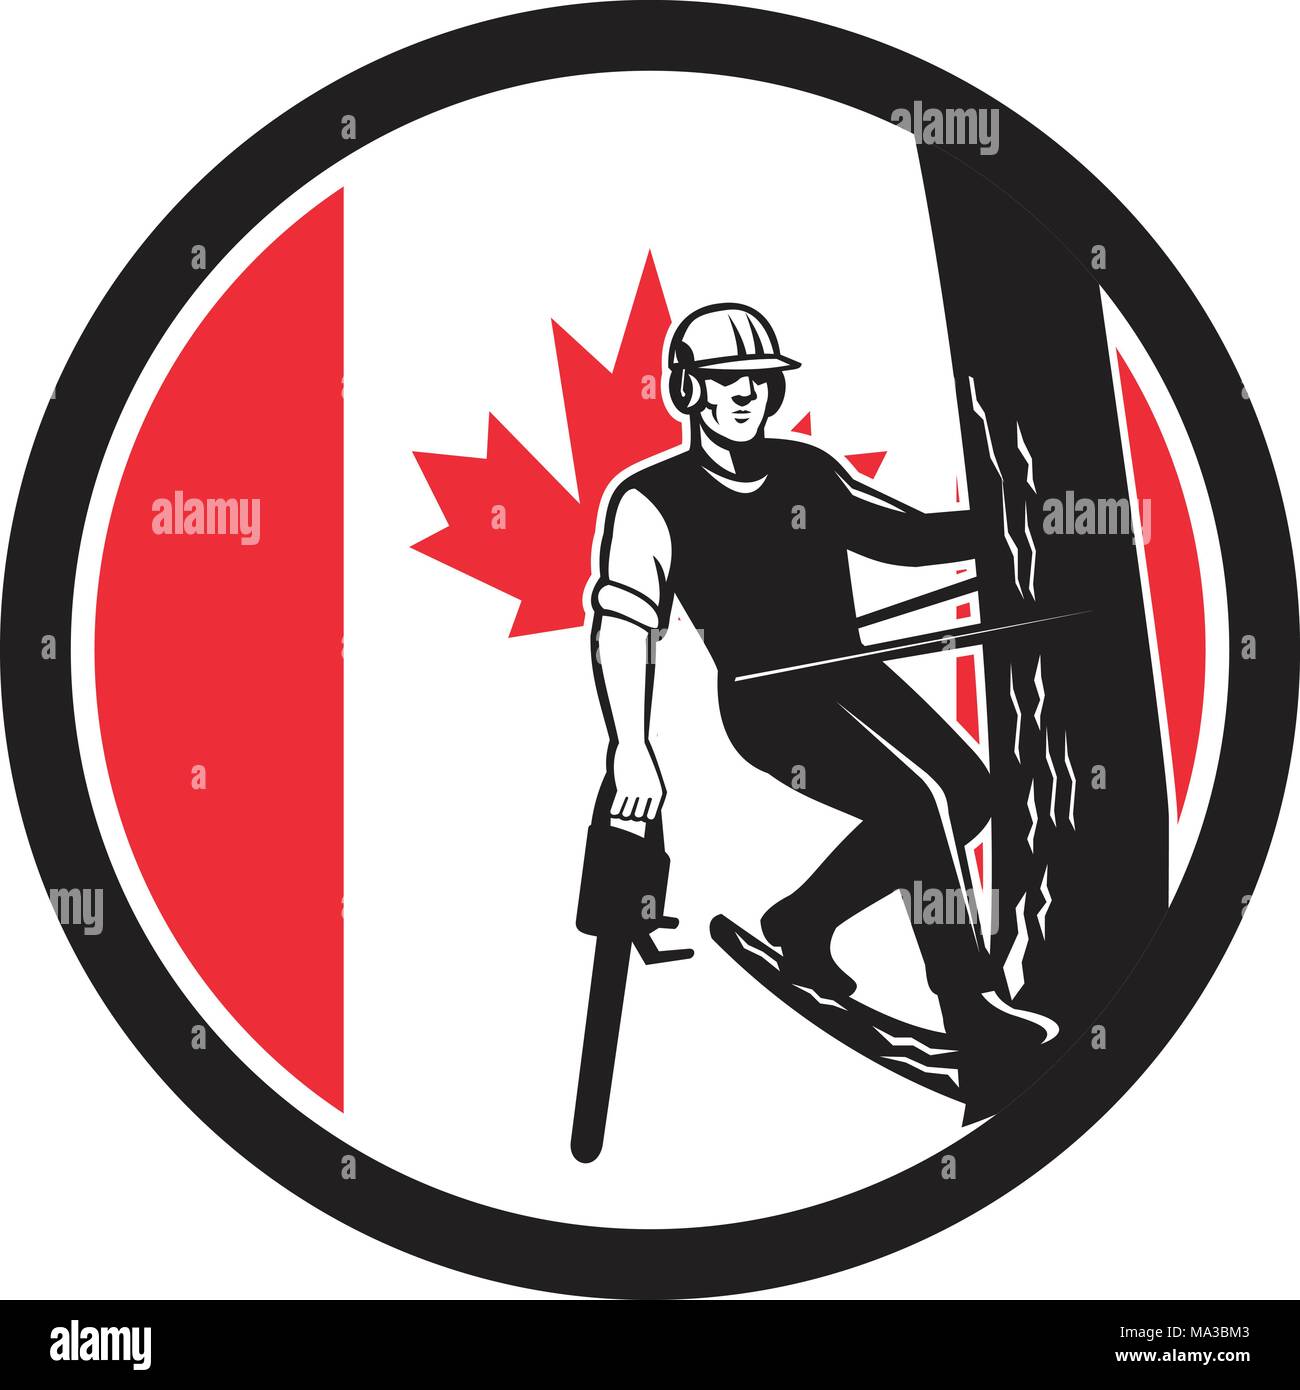 Icon retro style illustration of a Canadian tree surgeon, arborist, tree surgeon, or arboriculturist, a professional of arboriculture holding chainsaw Stock Vector